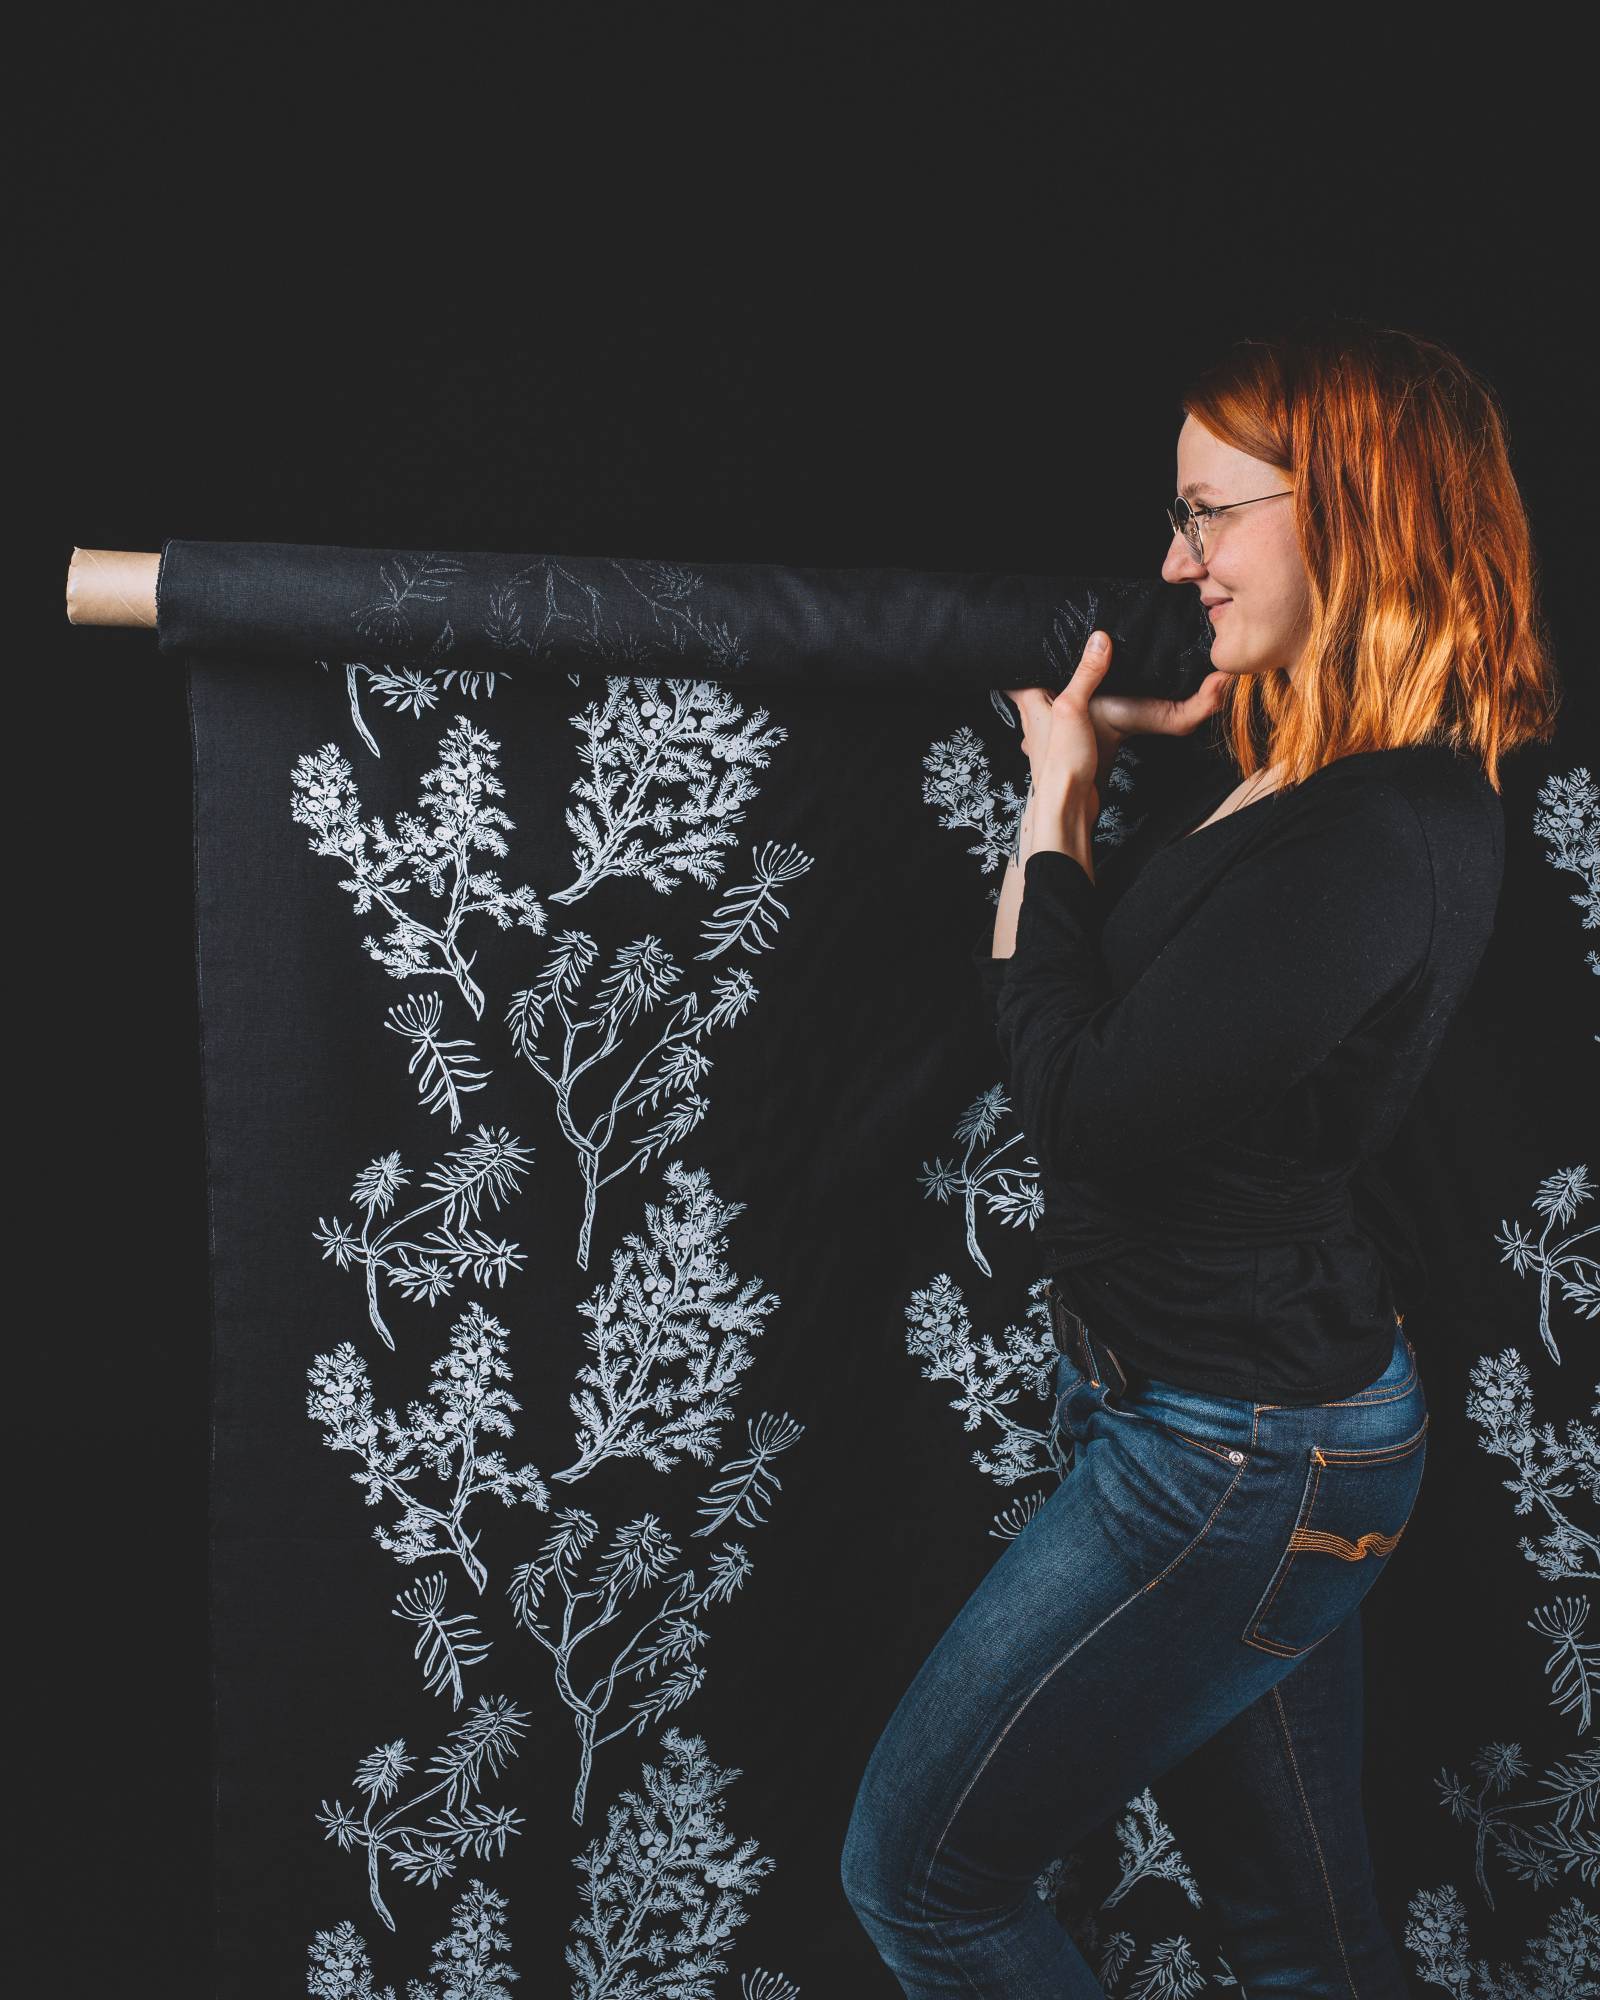 Do you have something special in mind and feel empowered by making it yourself? Woodlands hemp fabric by meter gives you the freedom of creativity to design and make your unique project. 